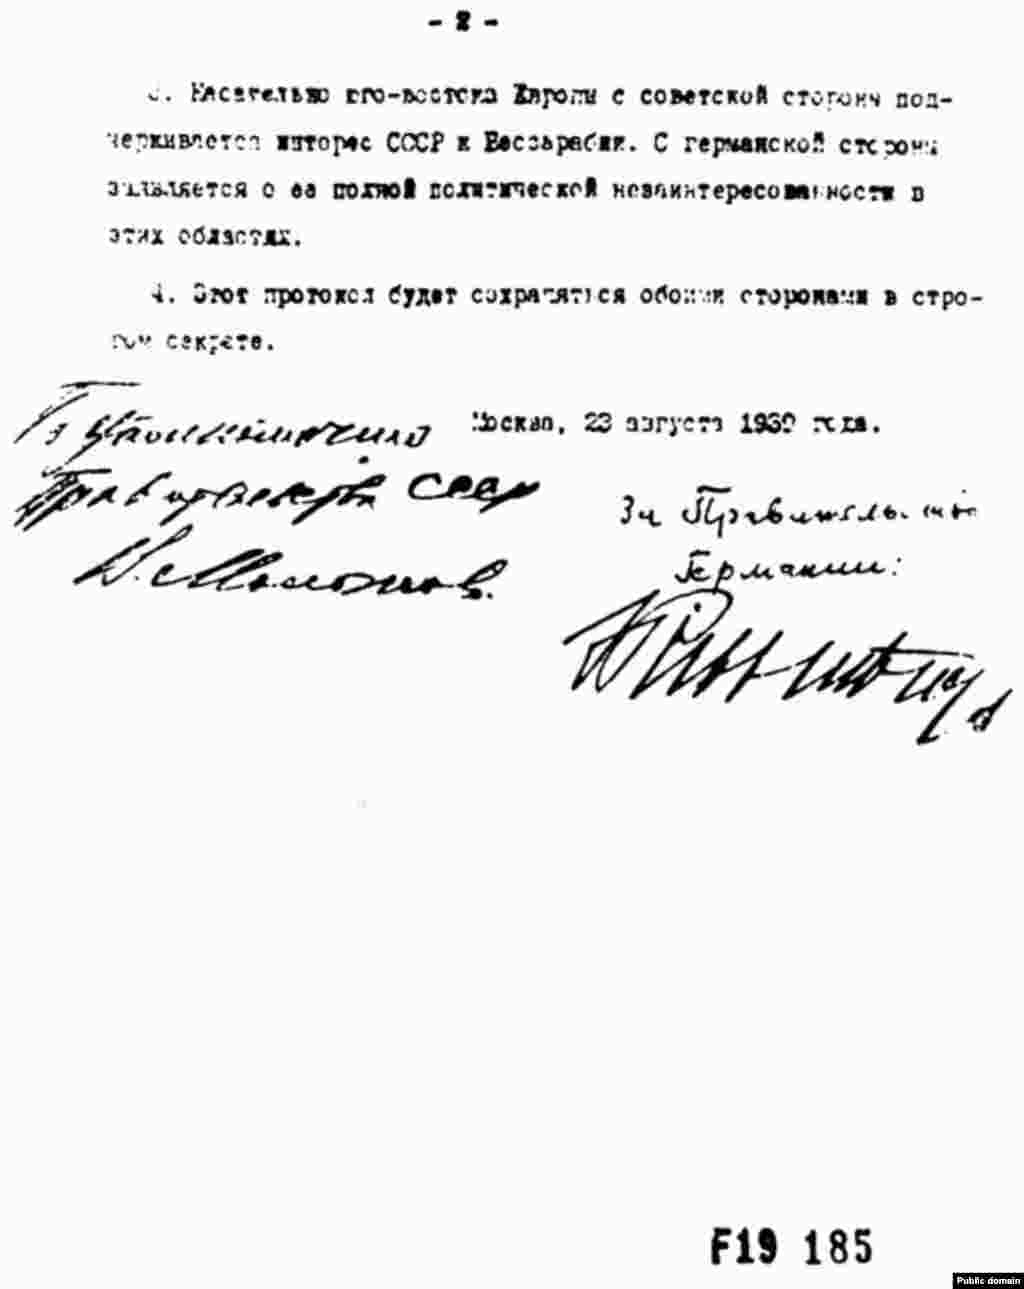 The same document in Russian